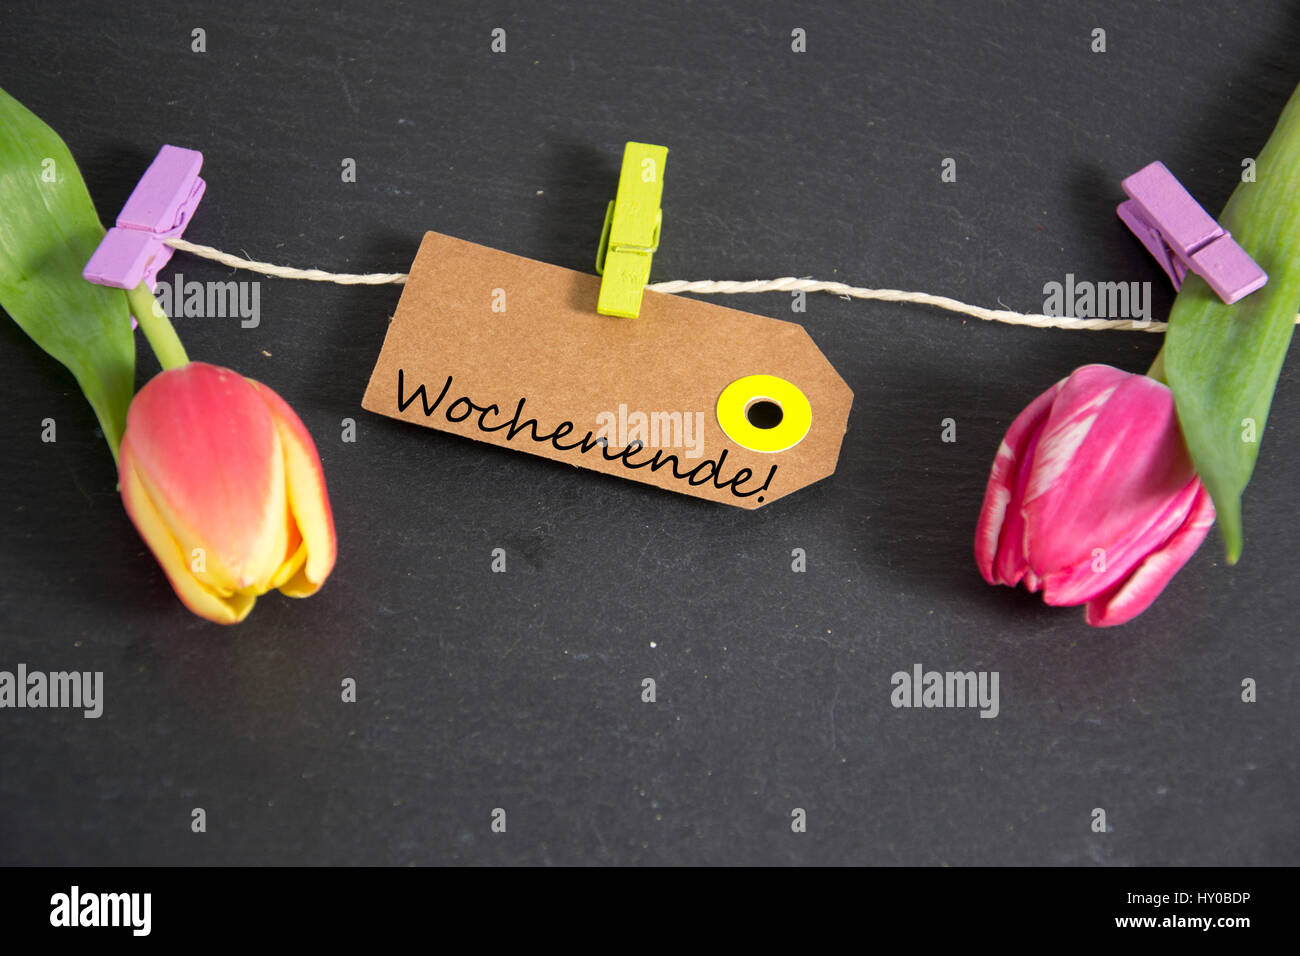 Wochenende inscription written on paper tag Stock Photo